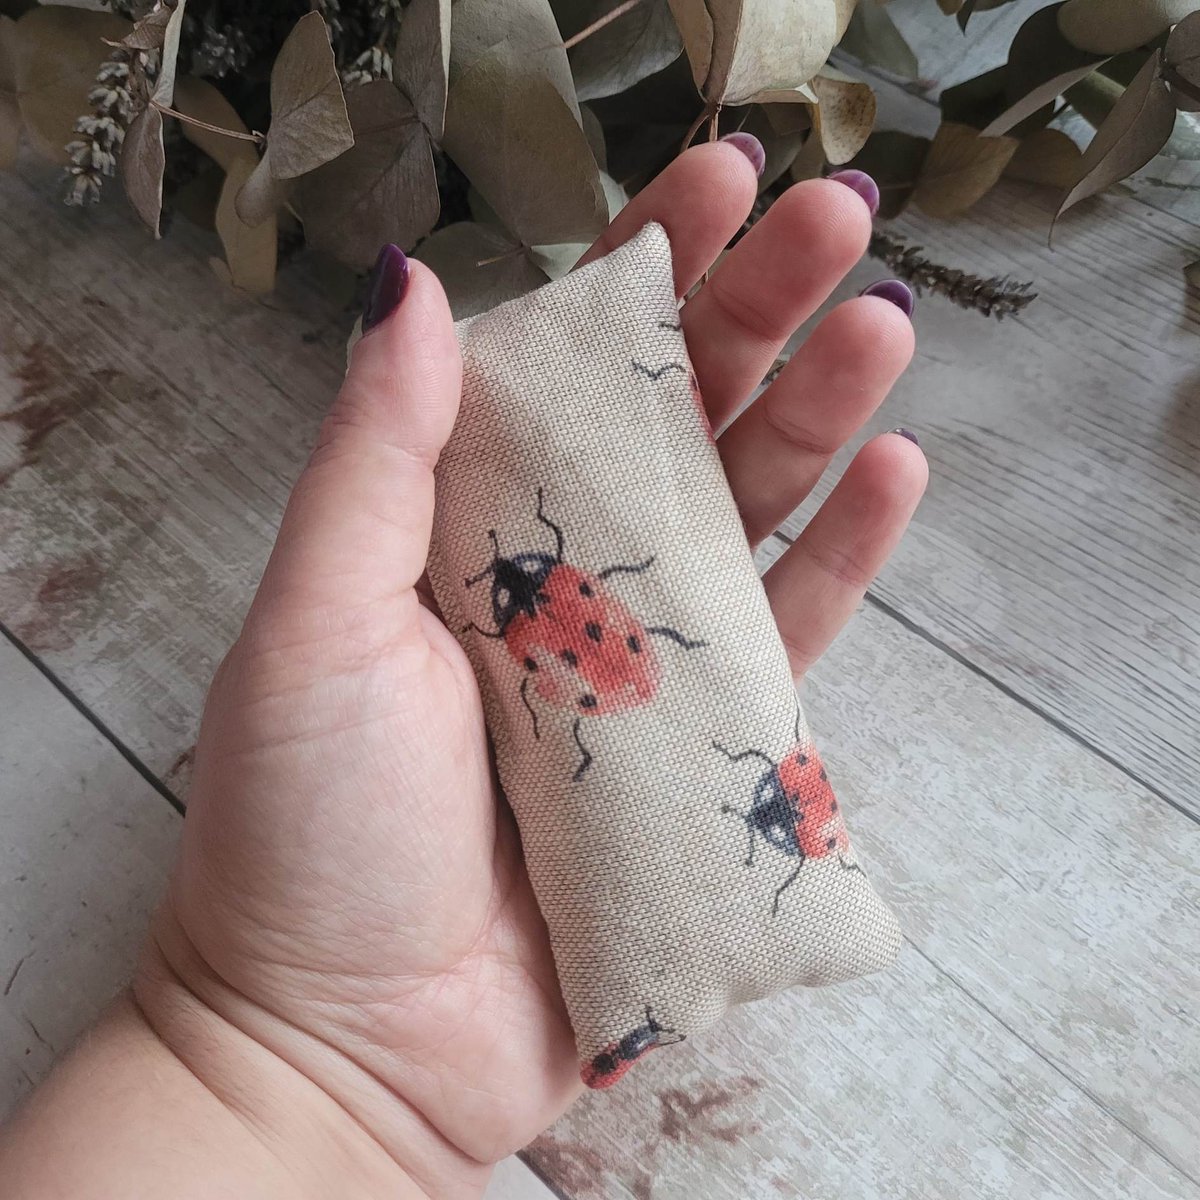 NEW ladybird hand warmers natural reusable warmers for keeping hands warm ladybug etsy.me/3Faj3RN via @Etsy #MHHSBD #UKMakers #smallbusiness #CraftBizParty #etsyshop #womaninbizhour #shopindie